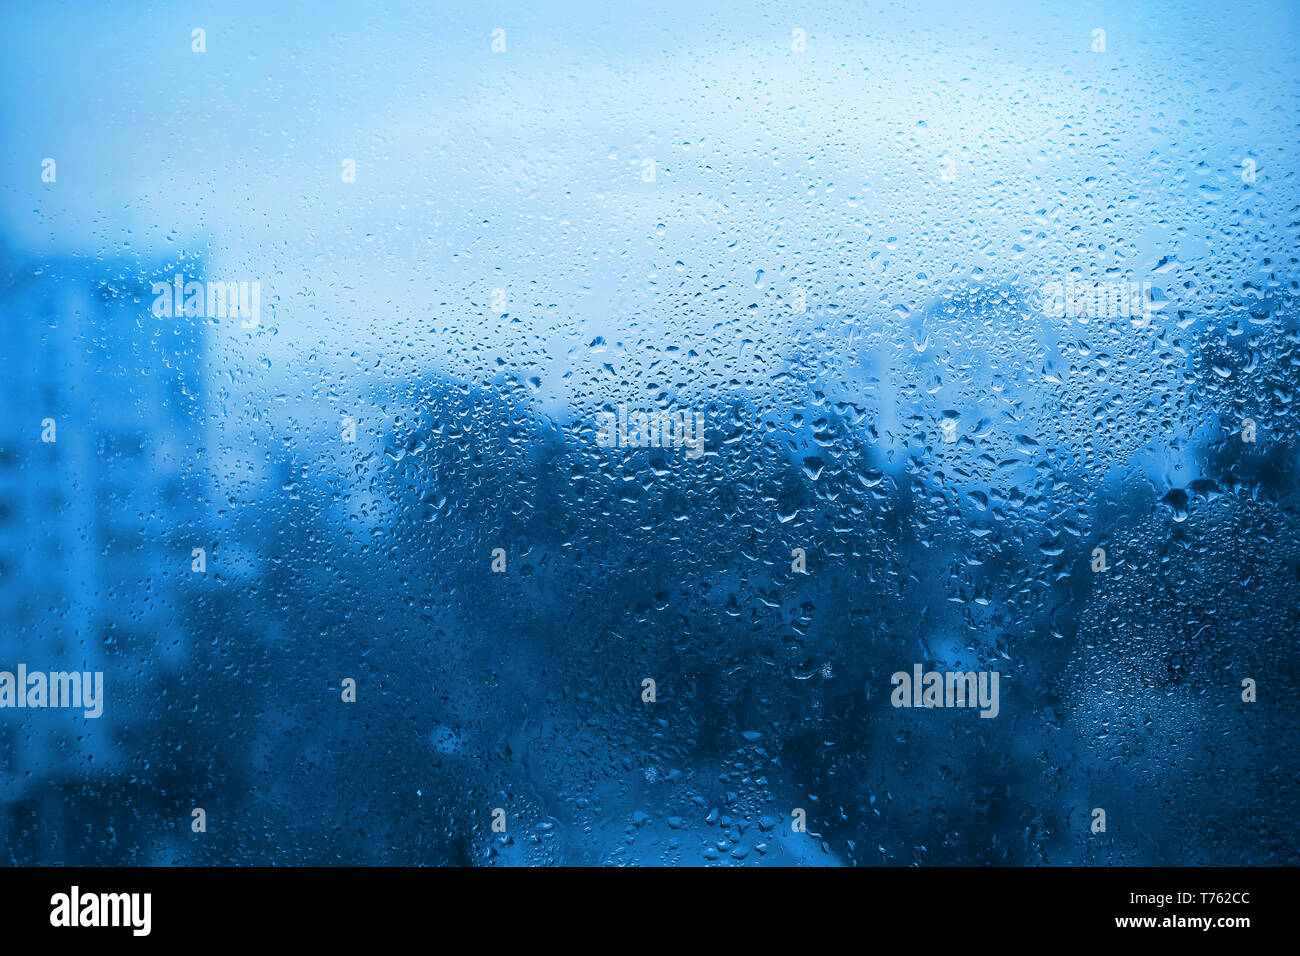 Background with natural drops of water on window glass Stock Photo